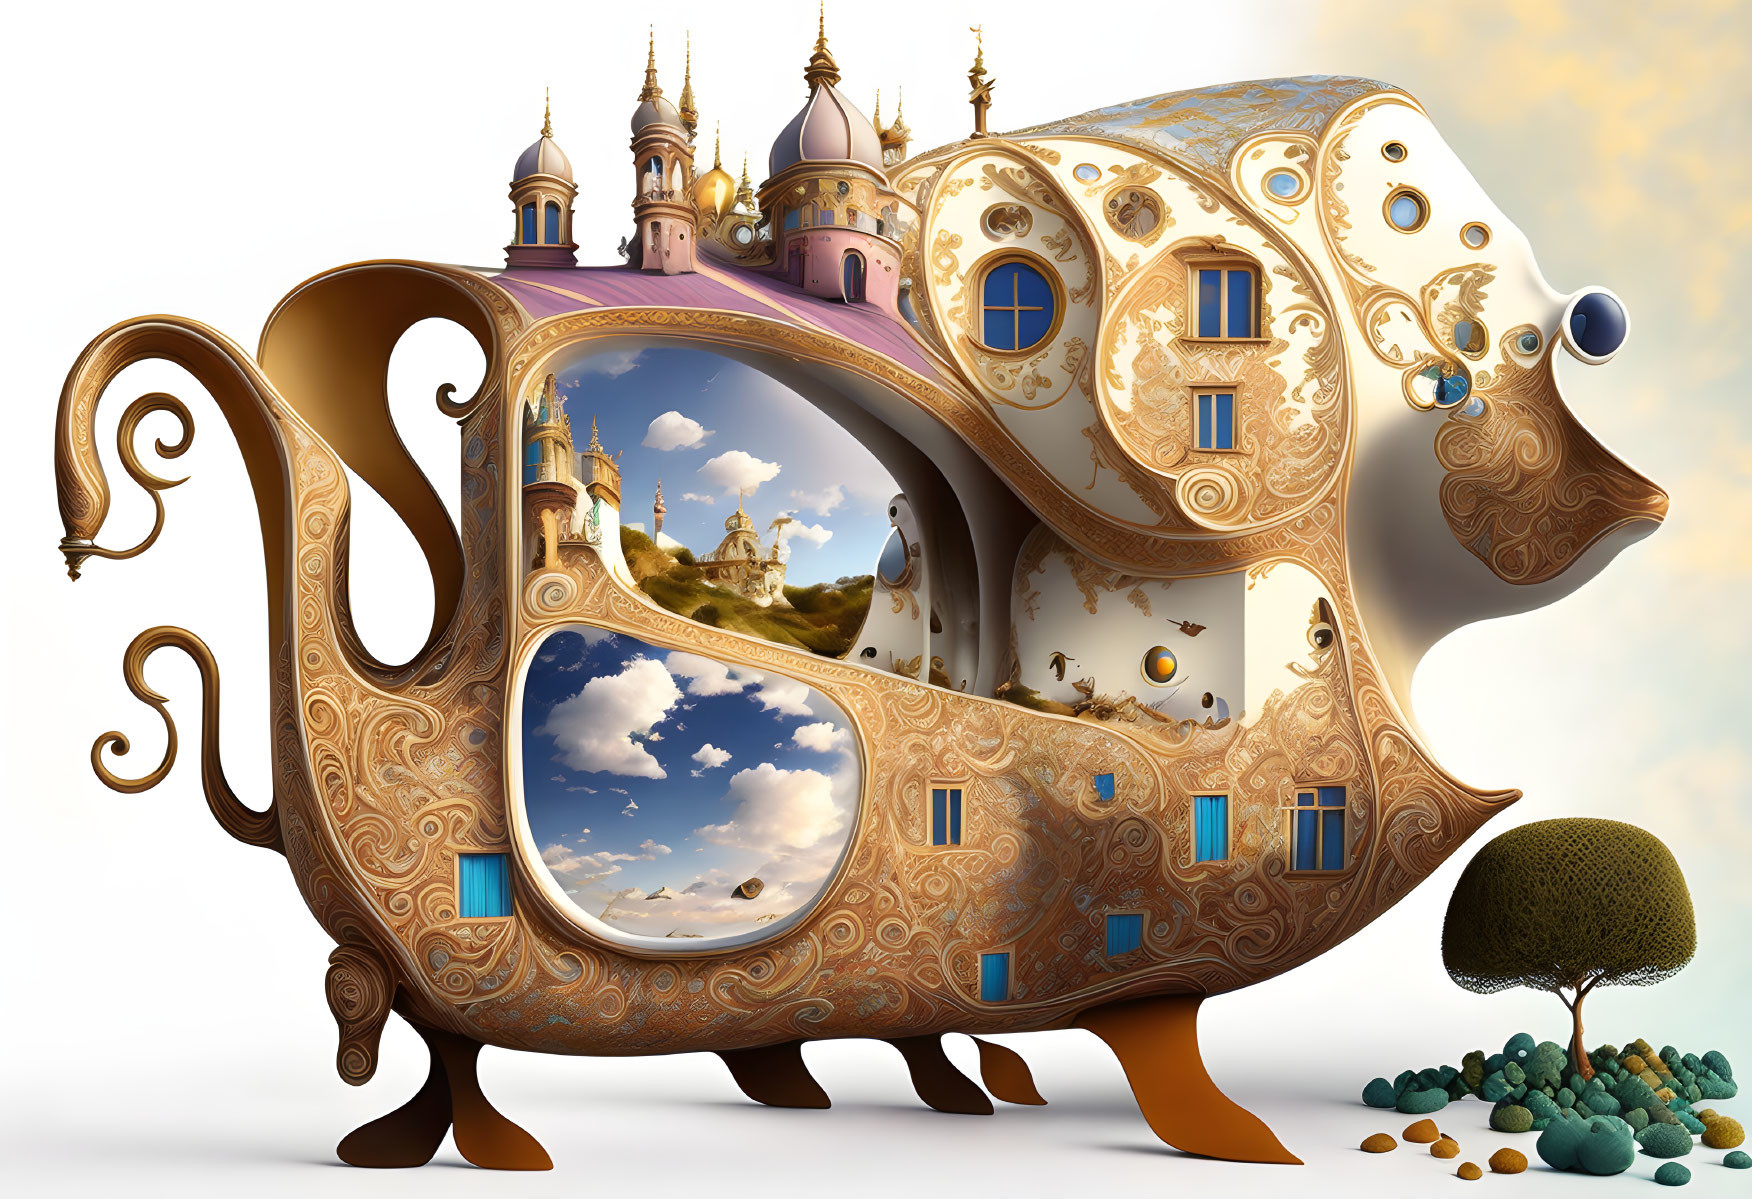 Teapot-shaped building with ornate patterns and whimsical landscapes